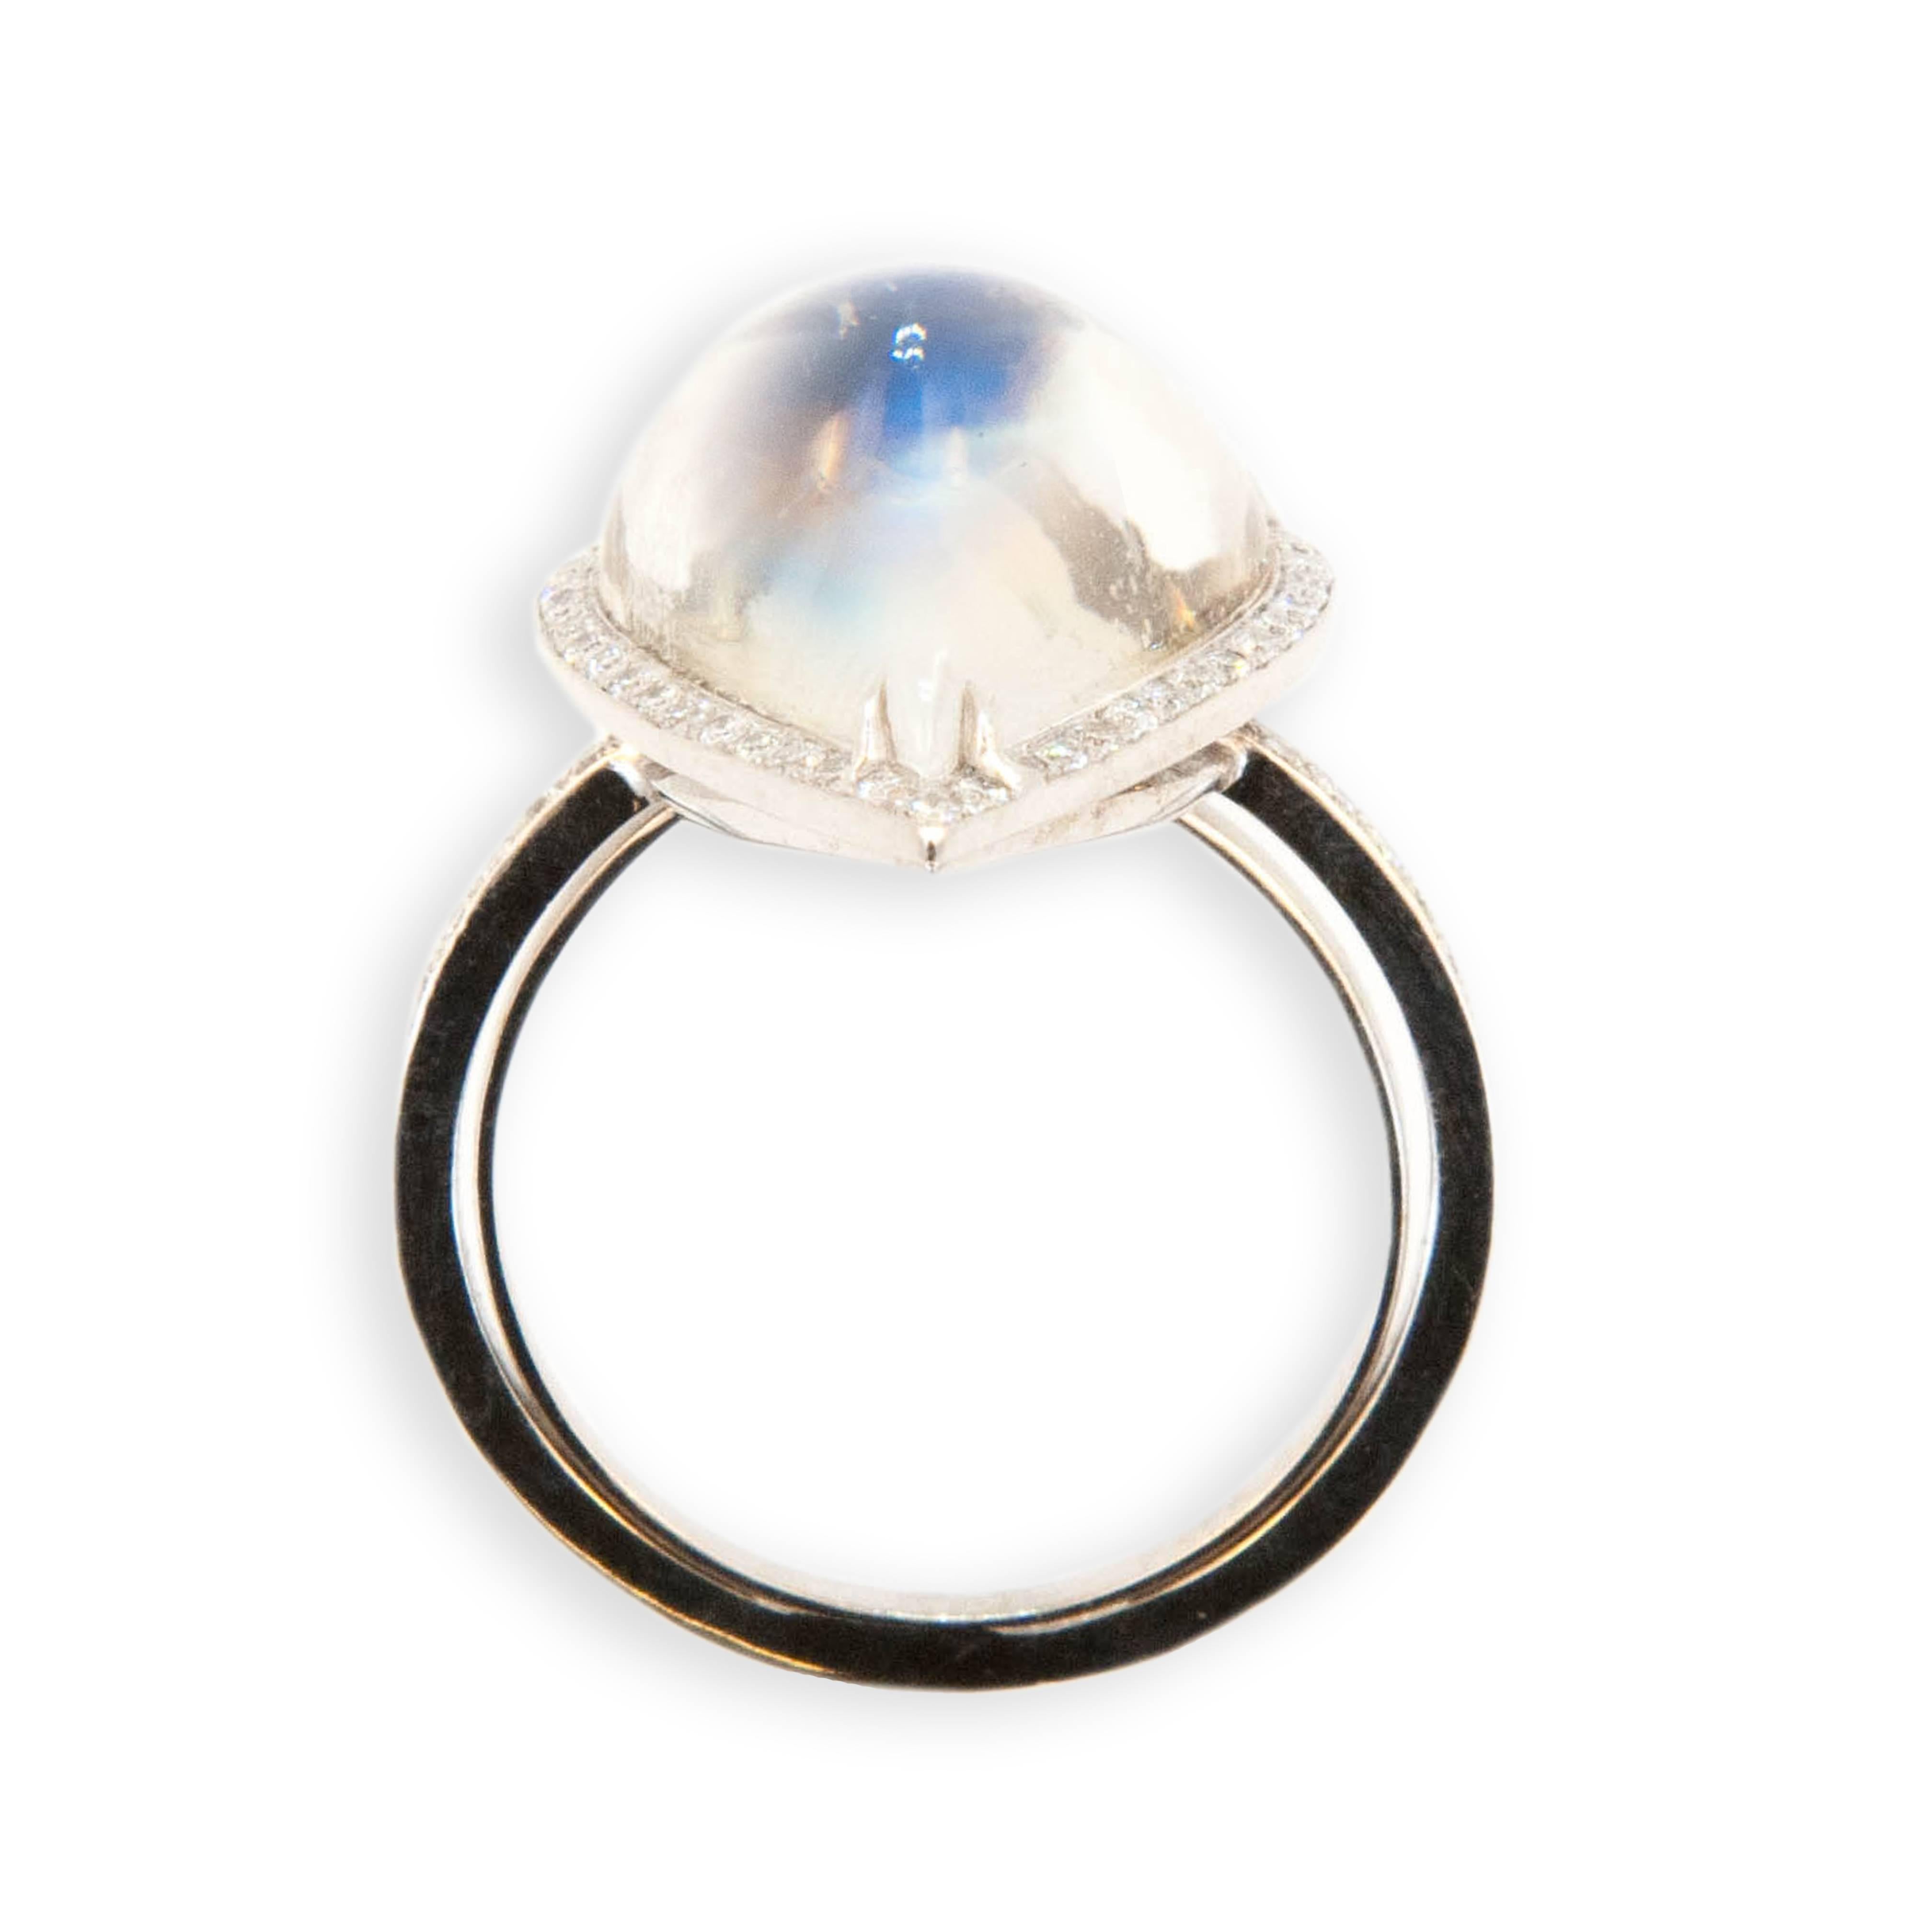 18 karat white gold ring set with one pear shape cabochon Moonstone 8.08 carats surrounded by 43 diamonds, shank is set with 36 diamonds. (79) total .33 carat total weight. Ring is a size 6.25 with a horseshoe.